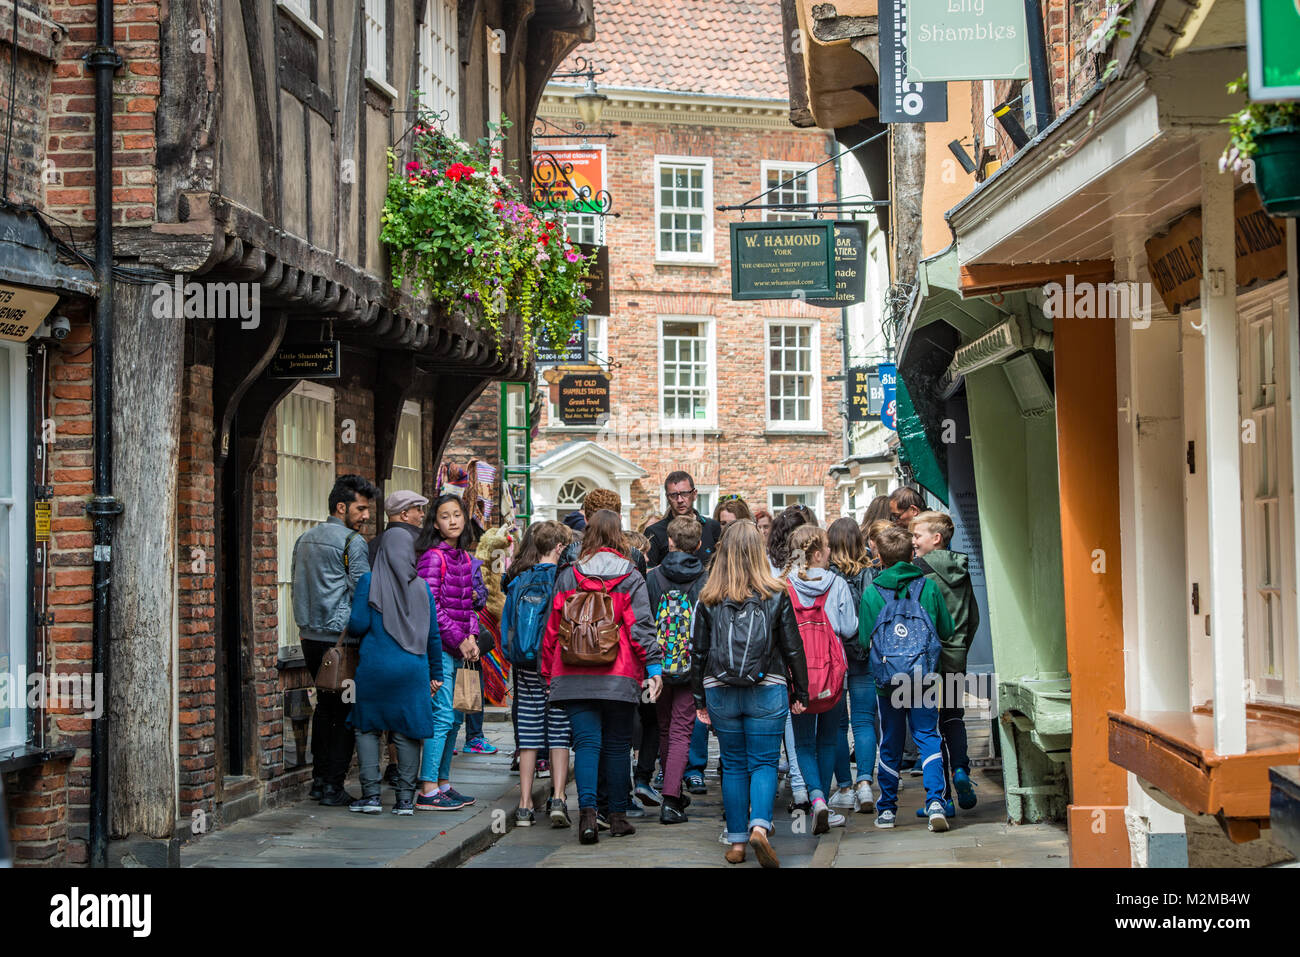 A group of school children crowd around adult male teacher on the historic street Shambles that features overhanging timber-framed building dating bac Stock Photo